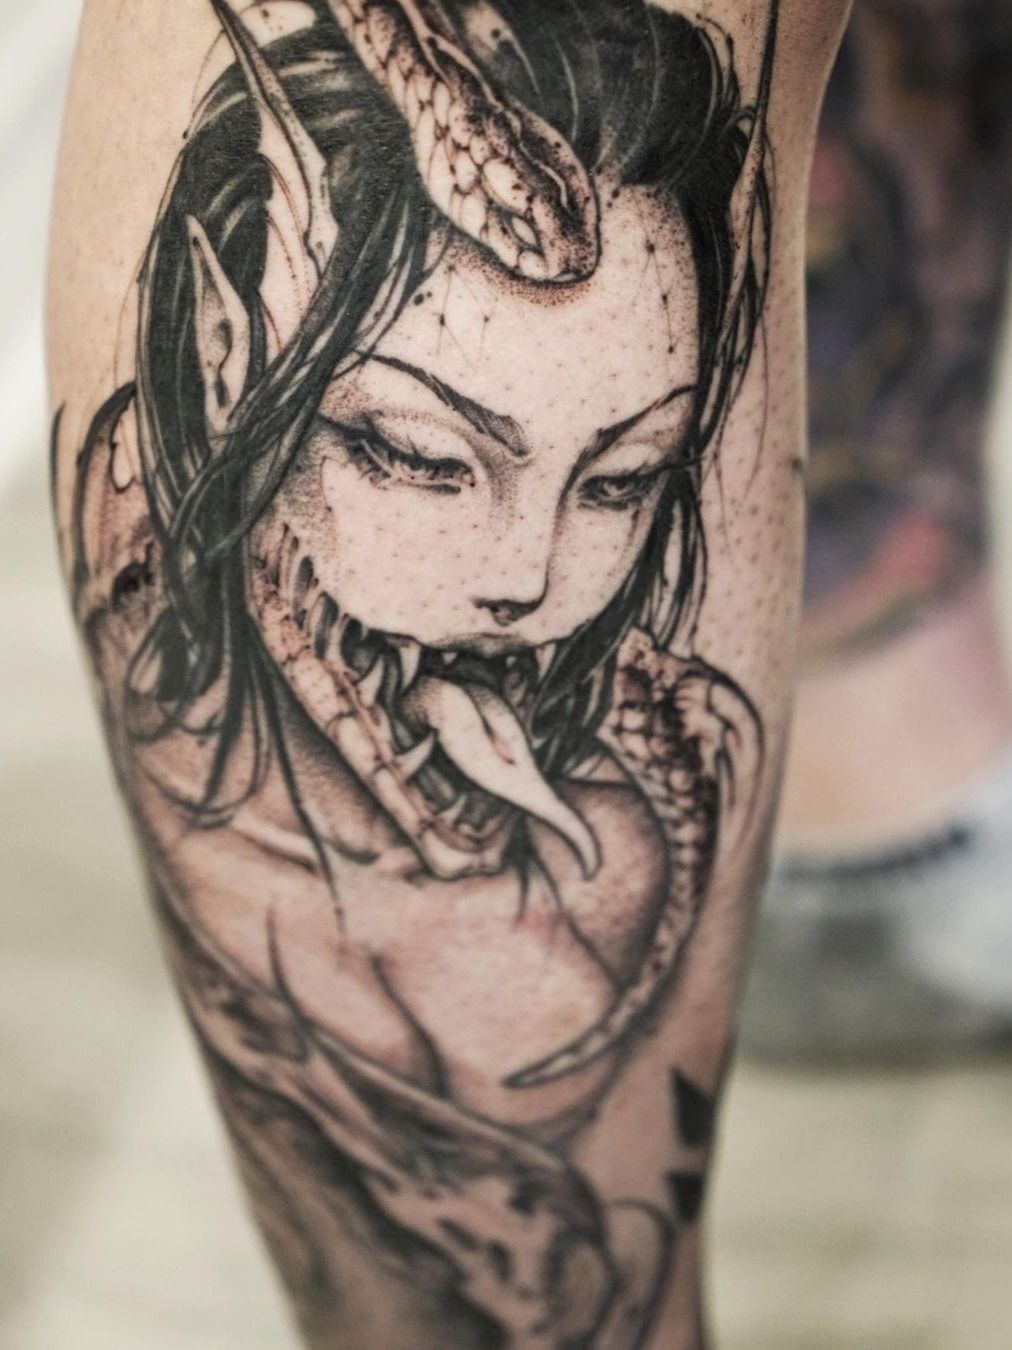 Faisal Al lami on Instagram Demon snake for chloesimoneee It was an  honor to work with you finally  Tattoo by FAisal Allami tattoosal  Done here